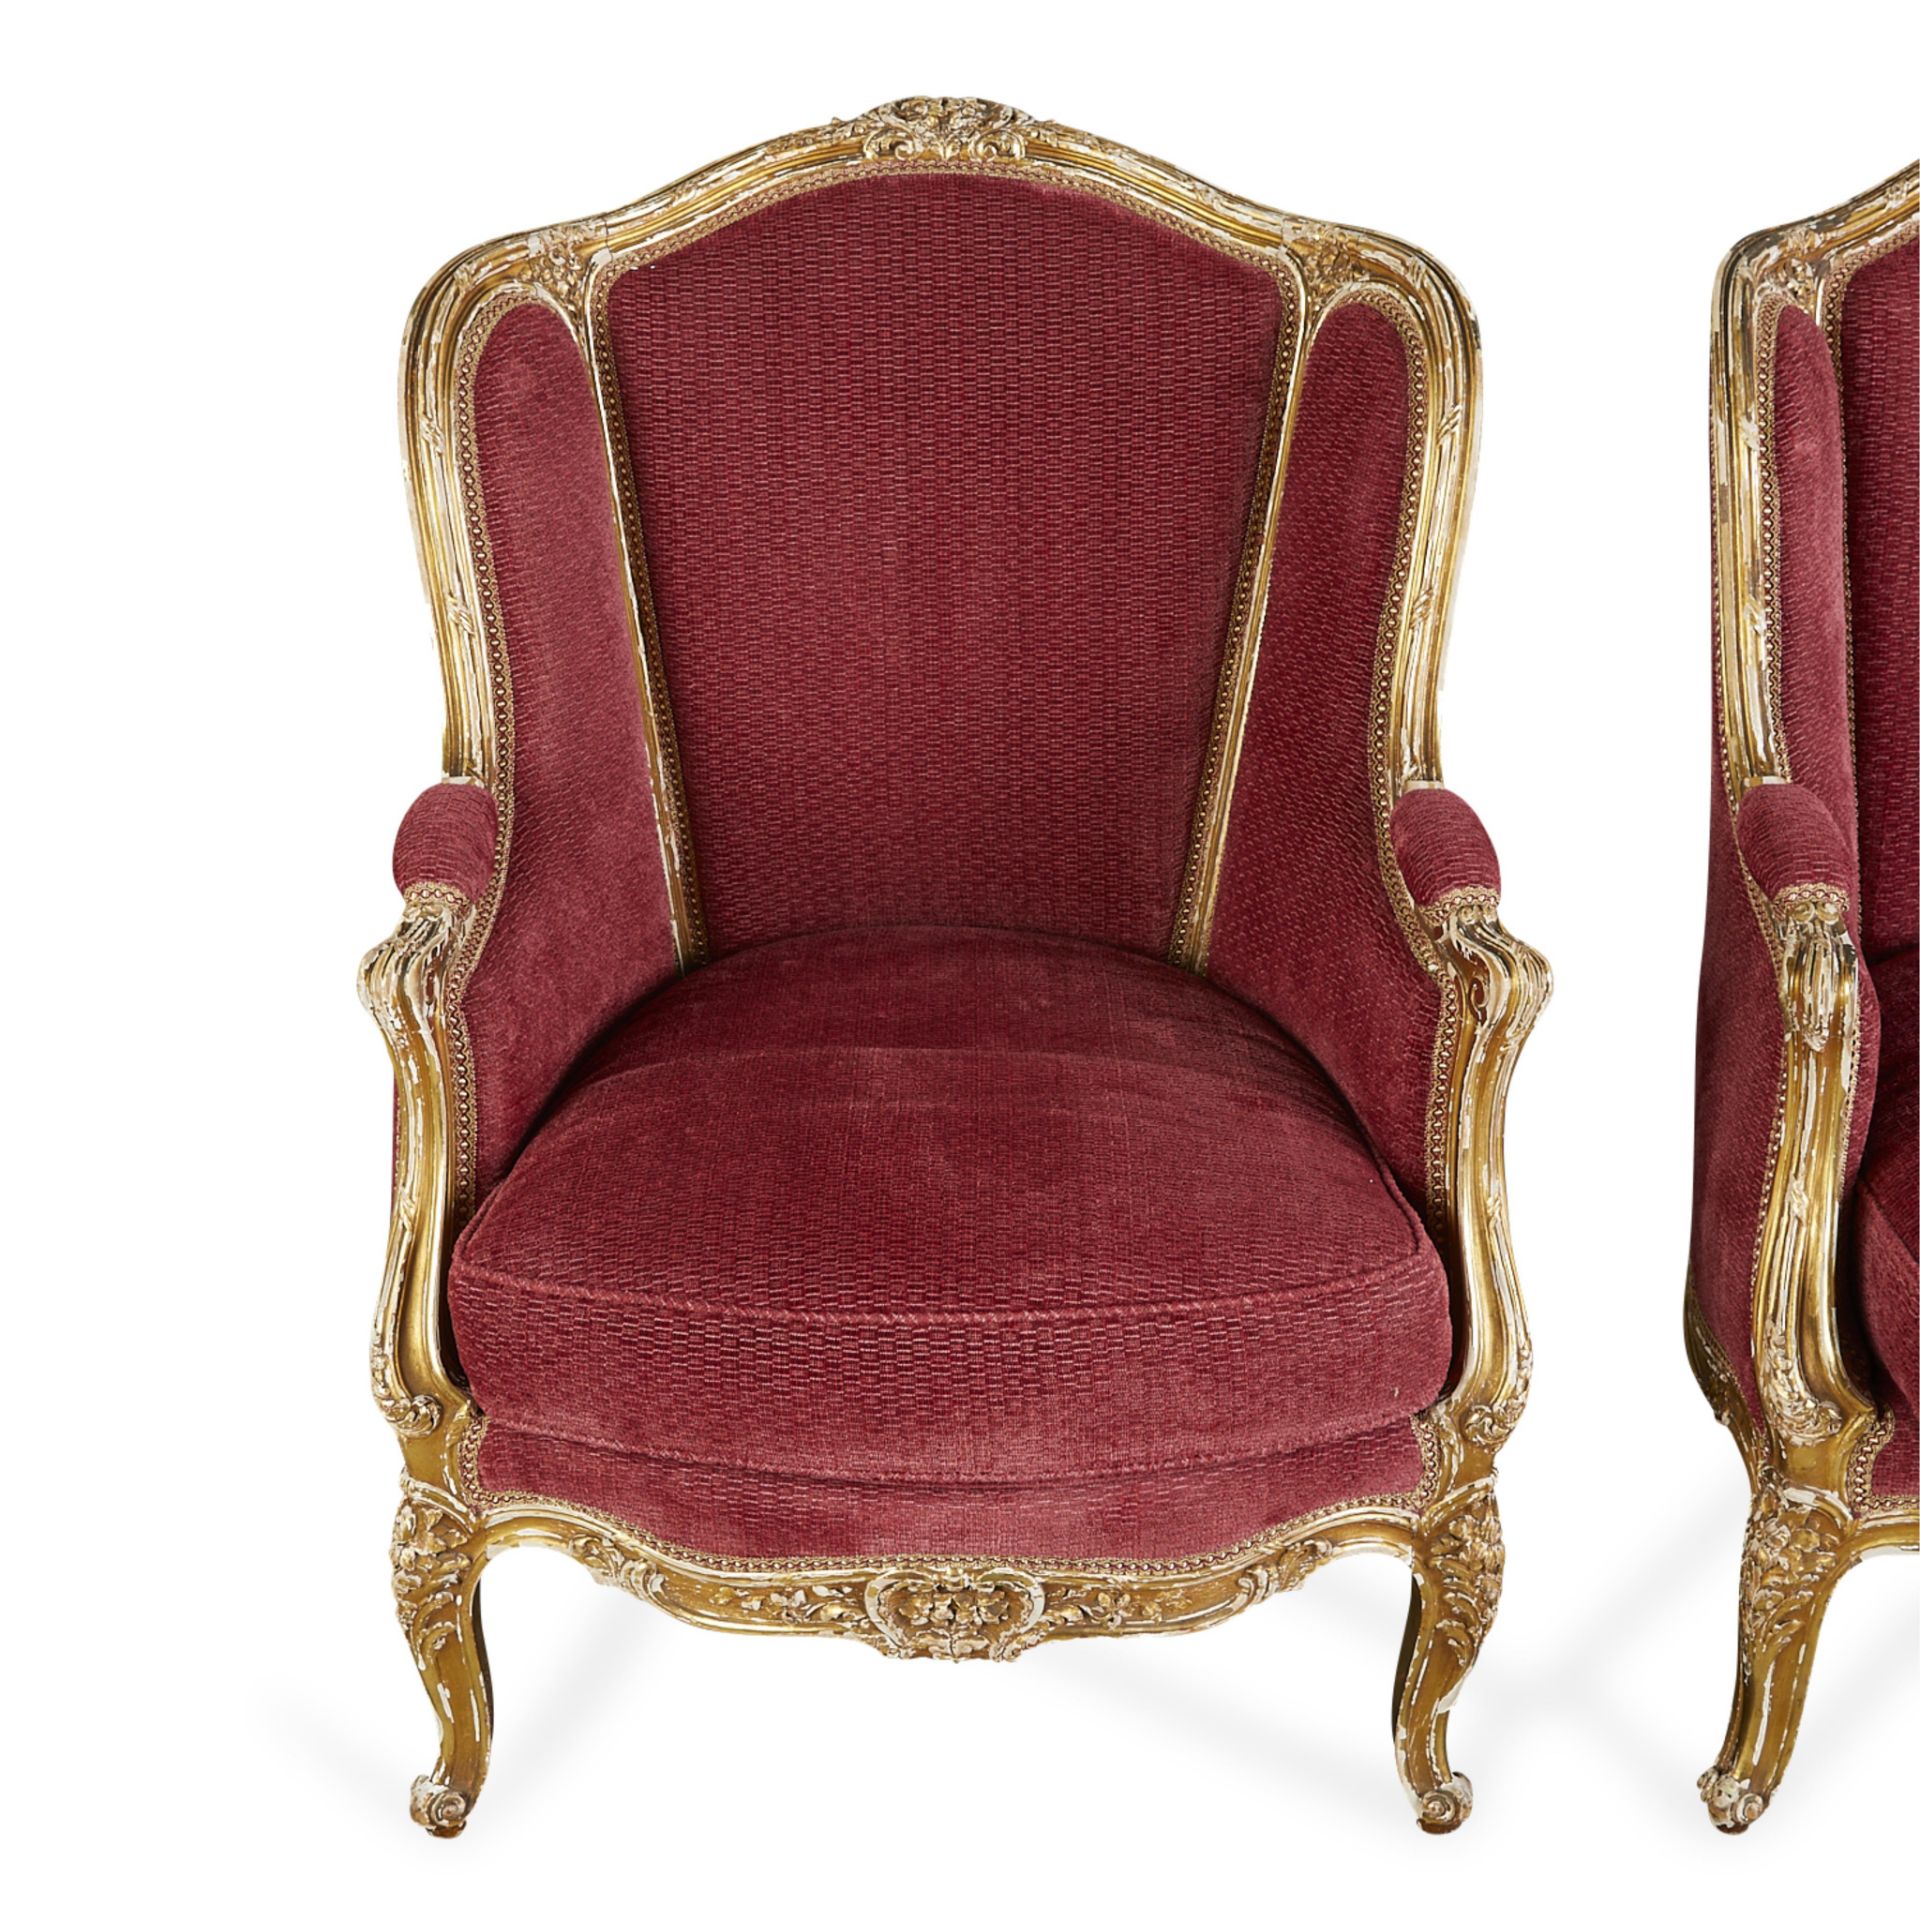 Pair of Louis XV Style Gilt Armchairs - Image 9 of 12